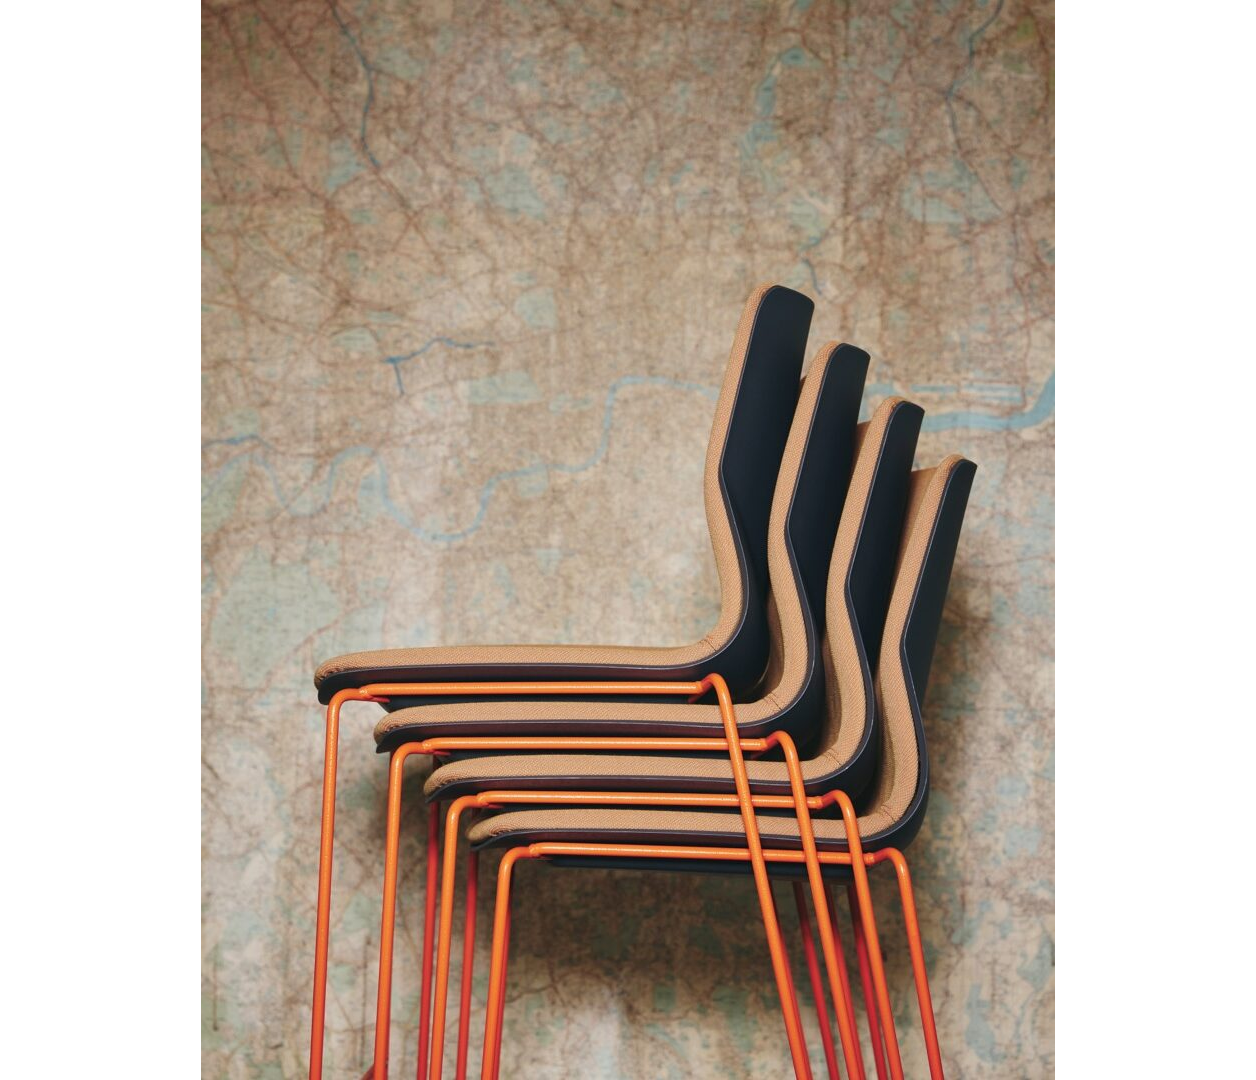 OCEE&FOUR – Chairs – FourSure 105 – Details Image 5 Large 2